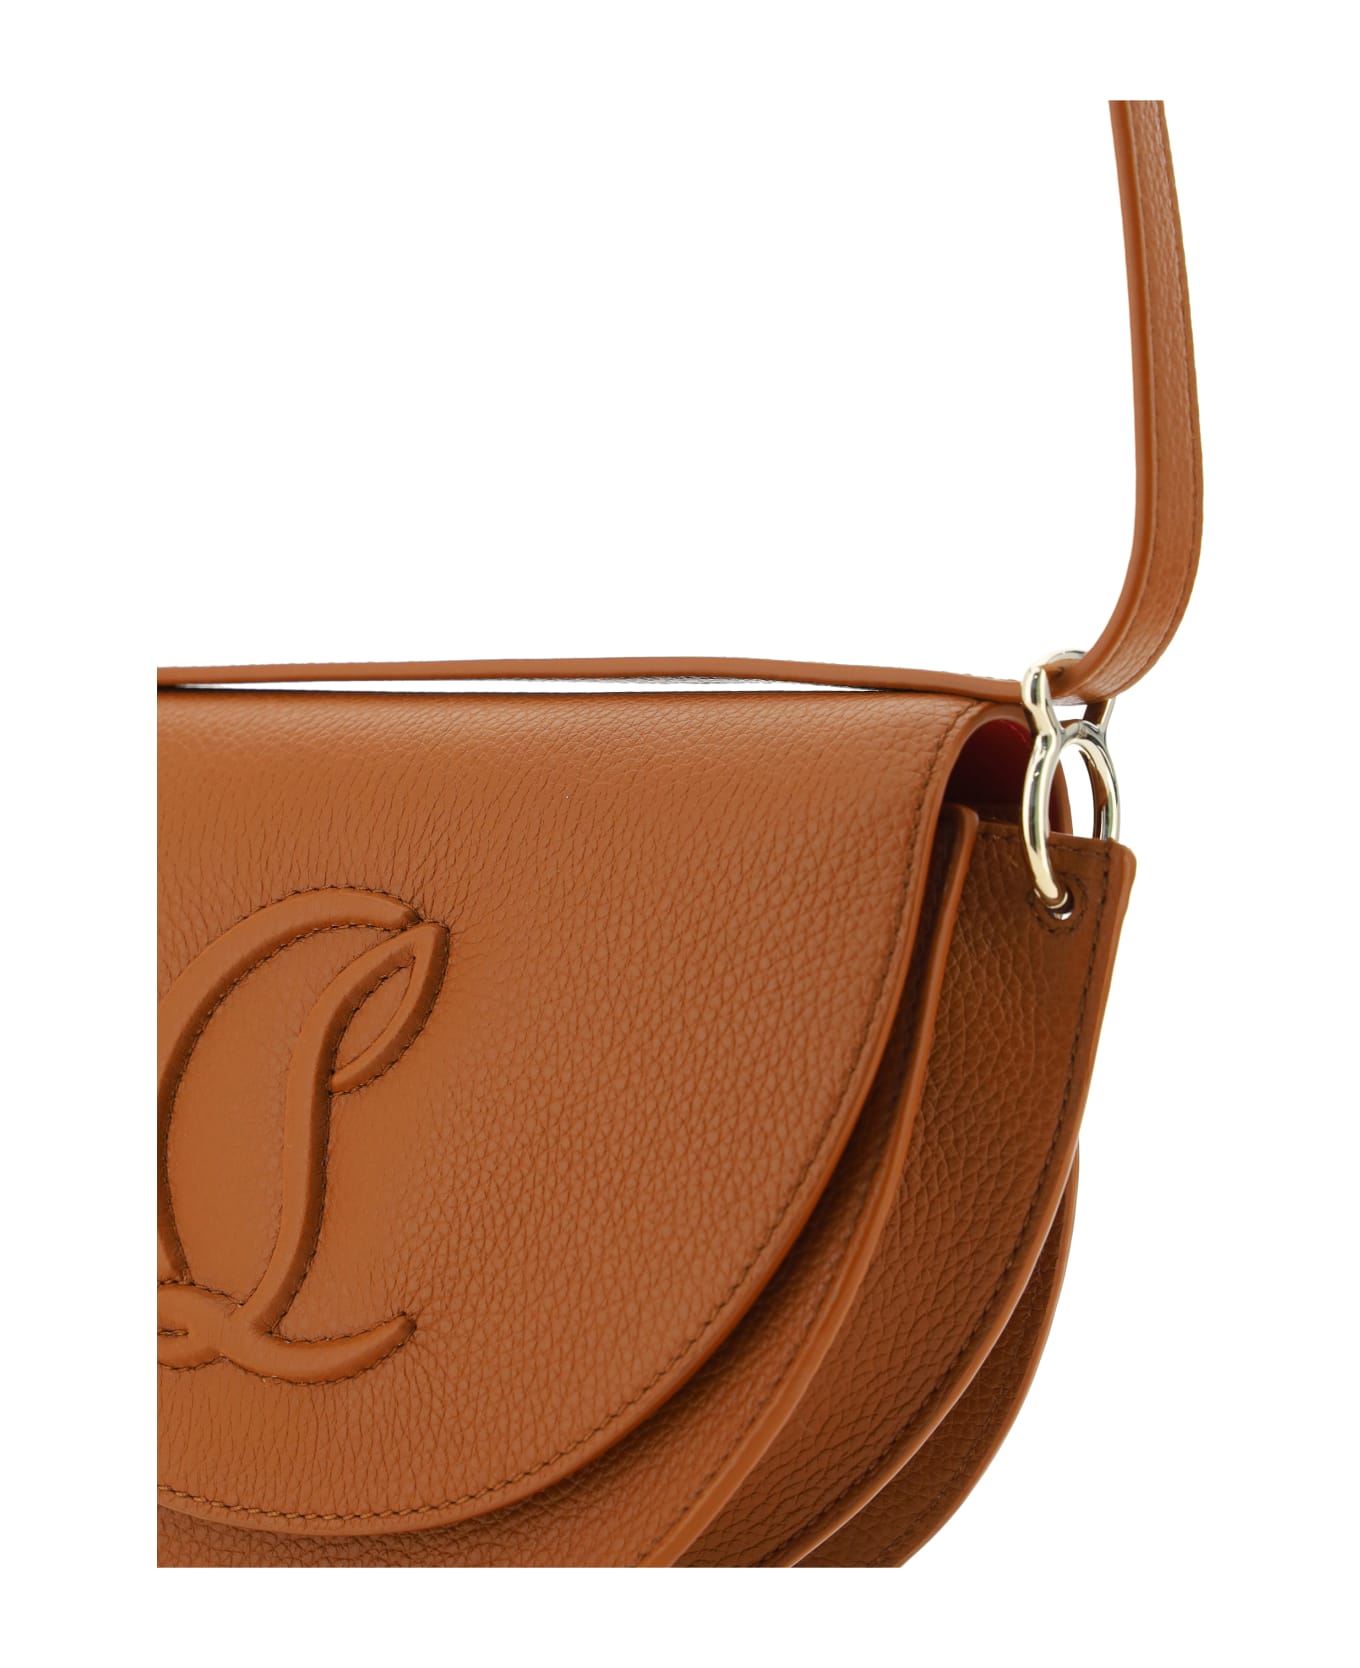 Christian Louboutin By My Side Crossbody Bag - Cuoio/cuoio